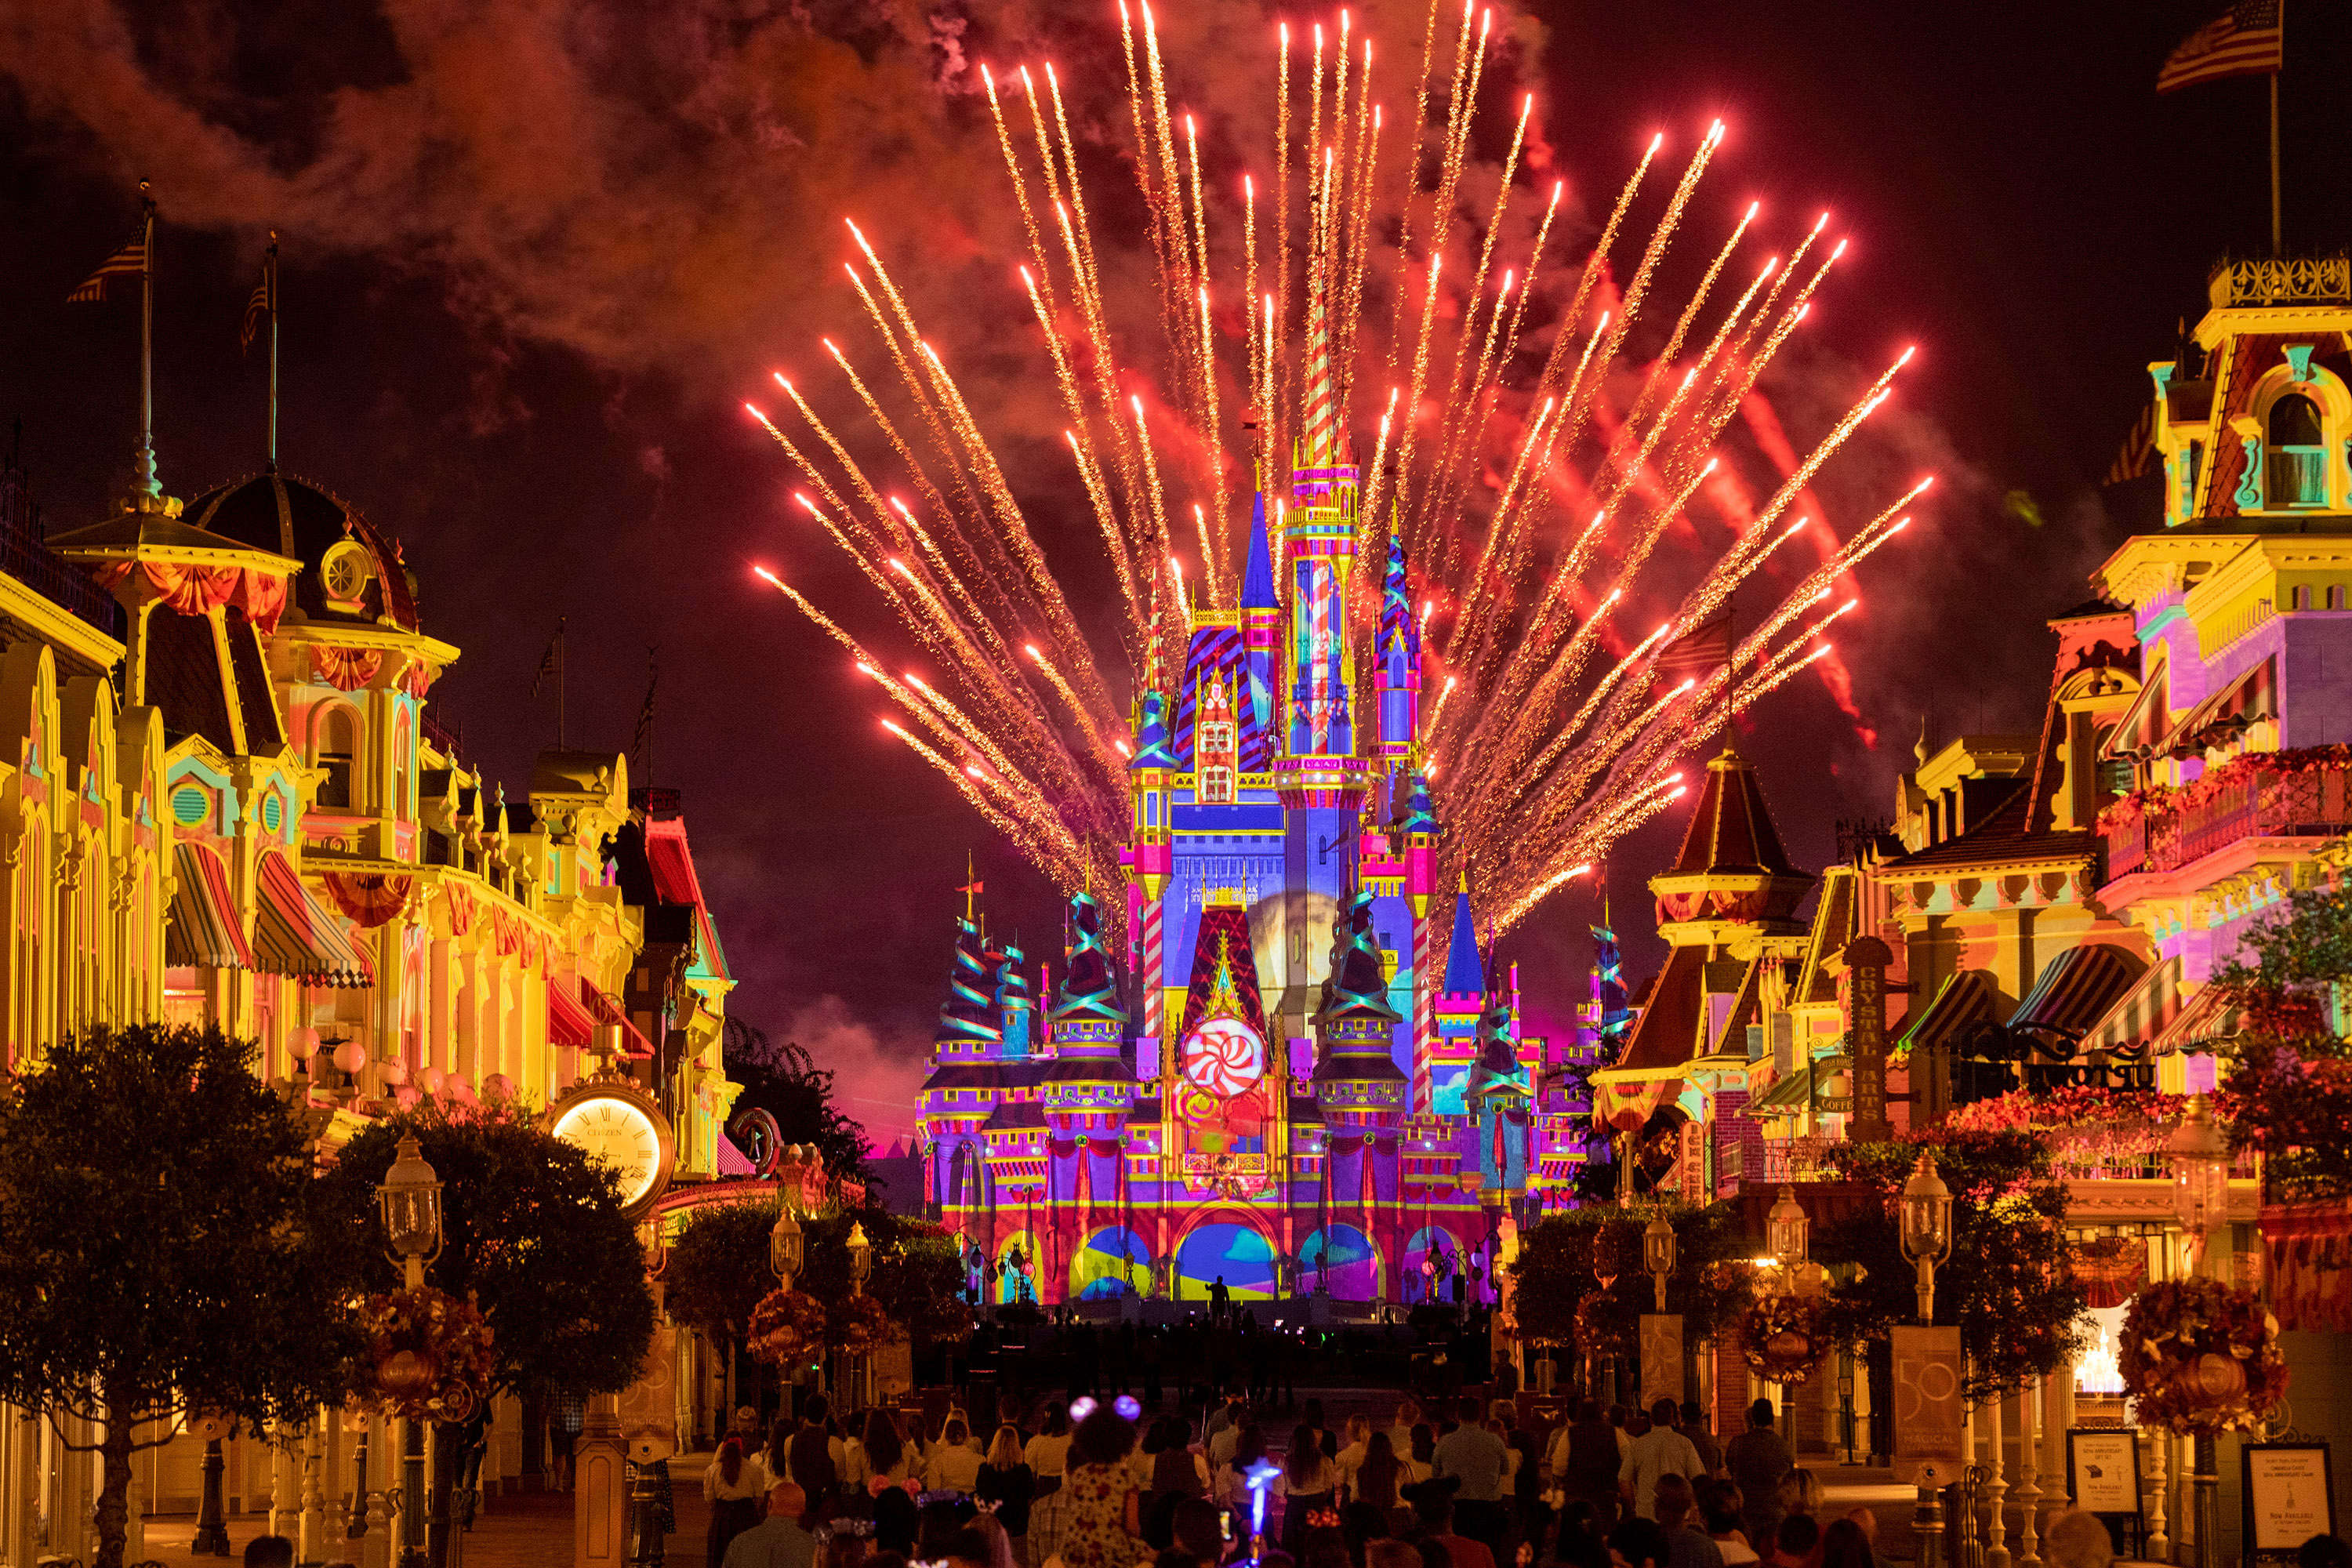 How to visit Disneyland or Disney World: Our expert tips